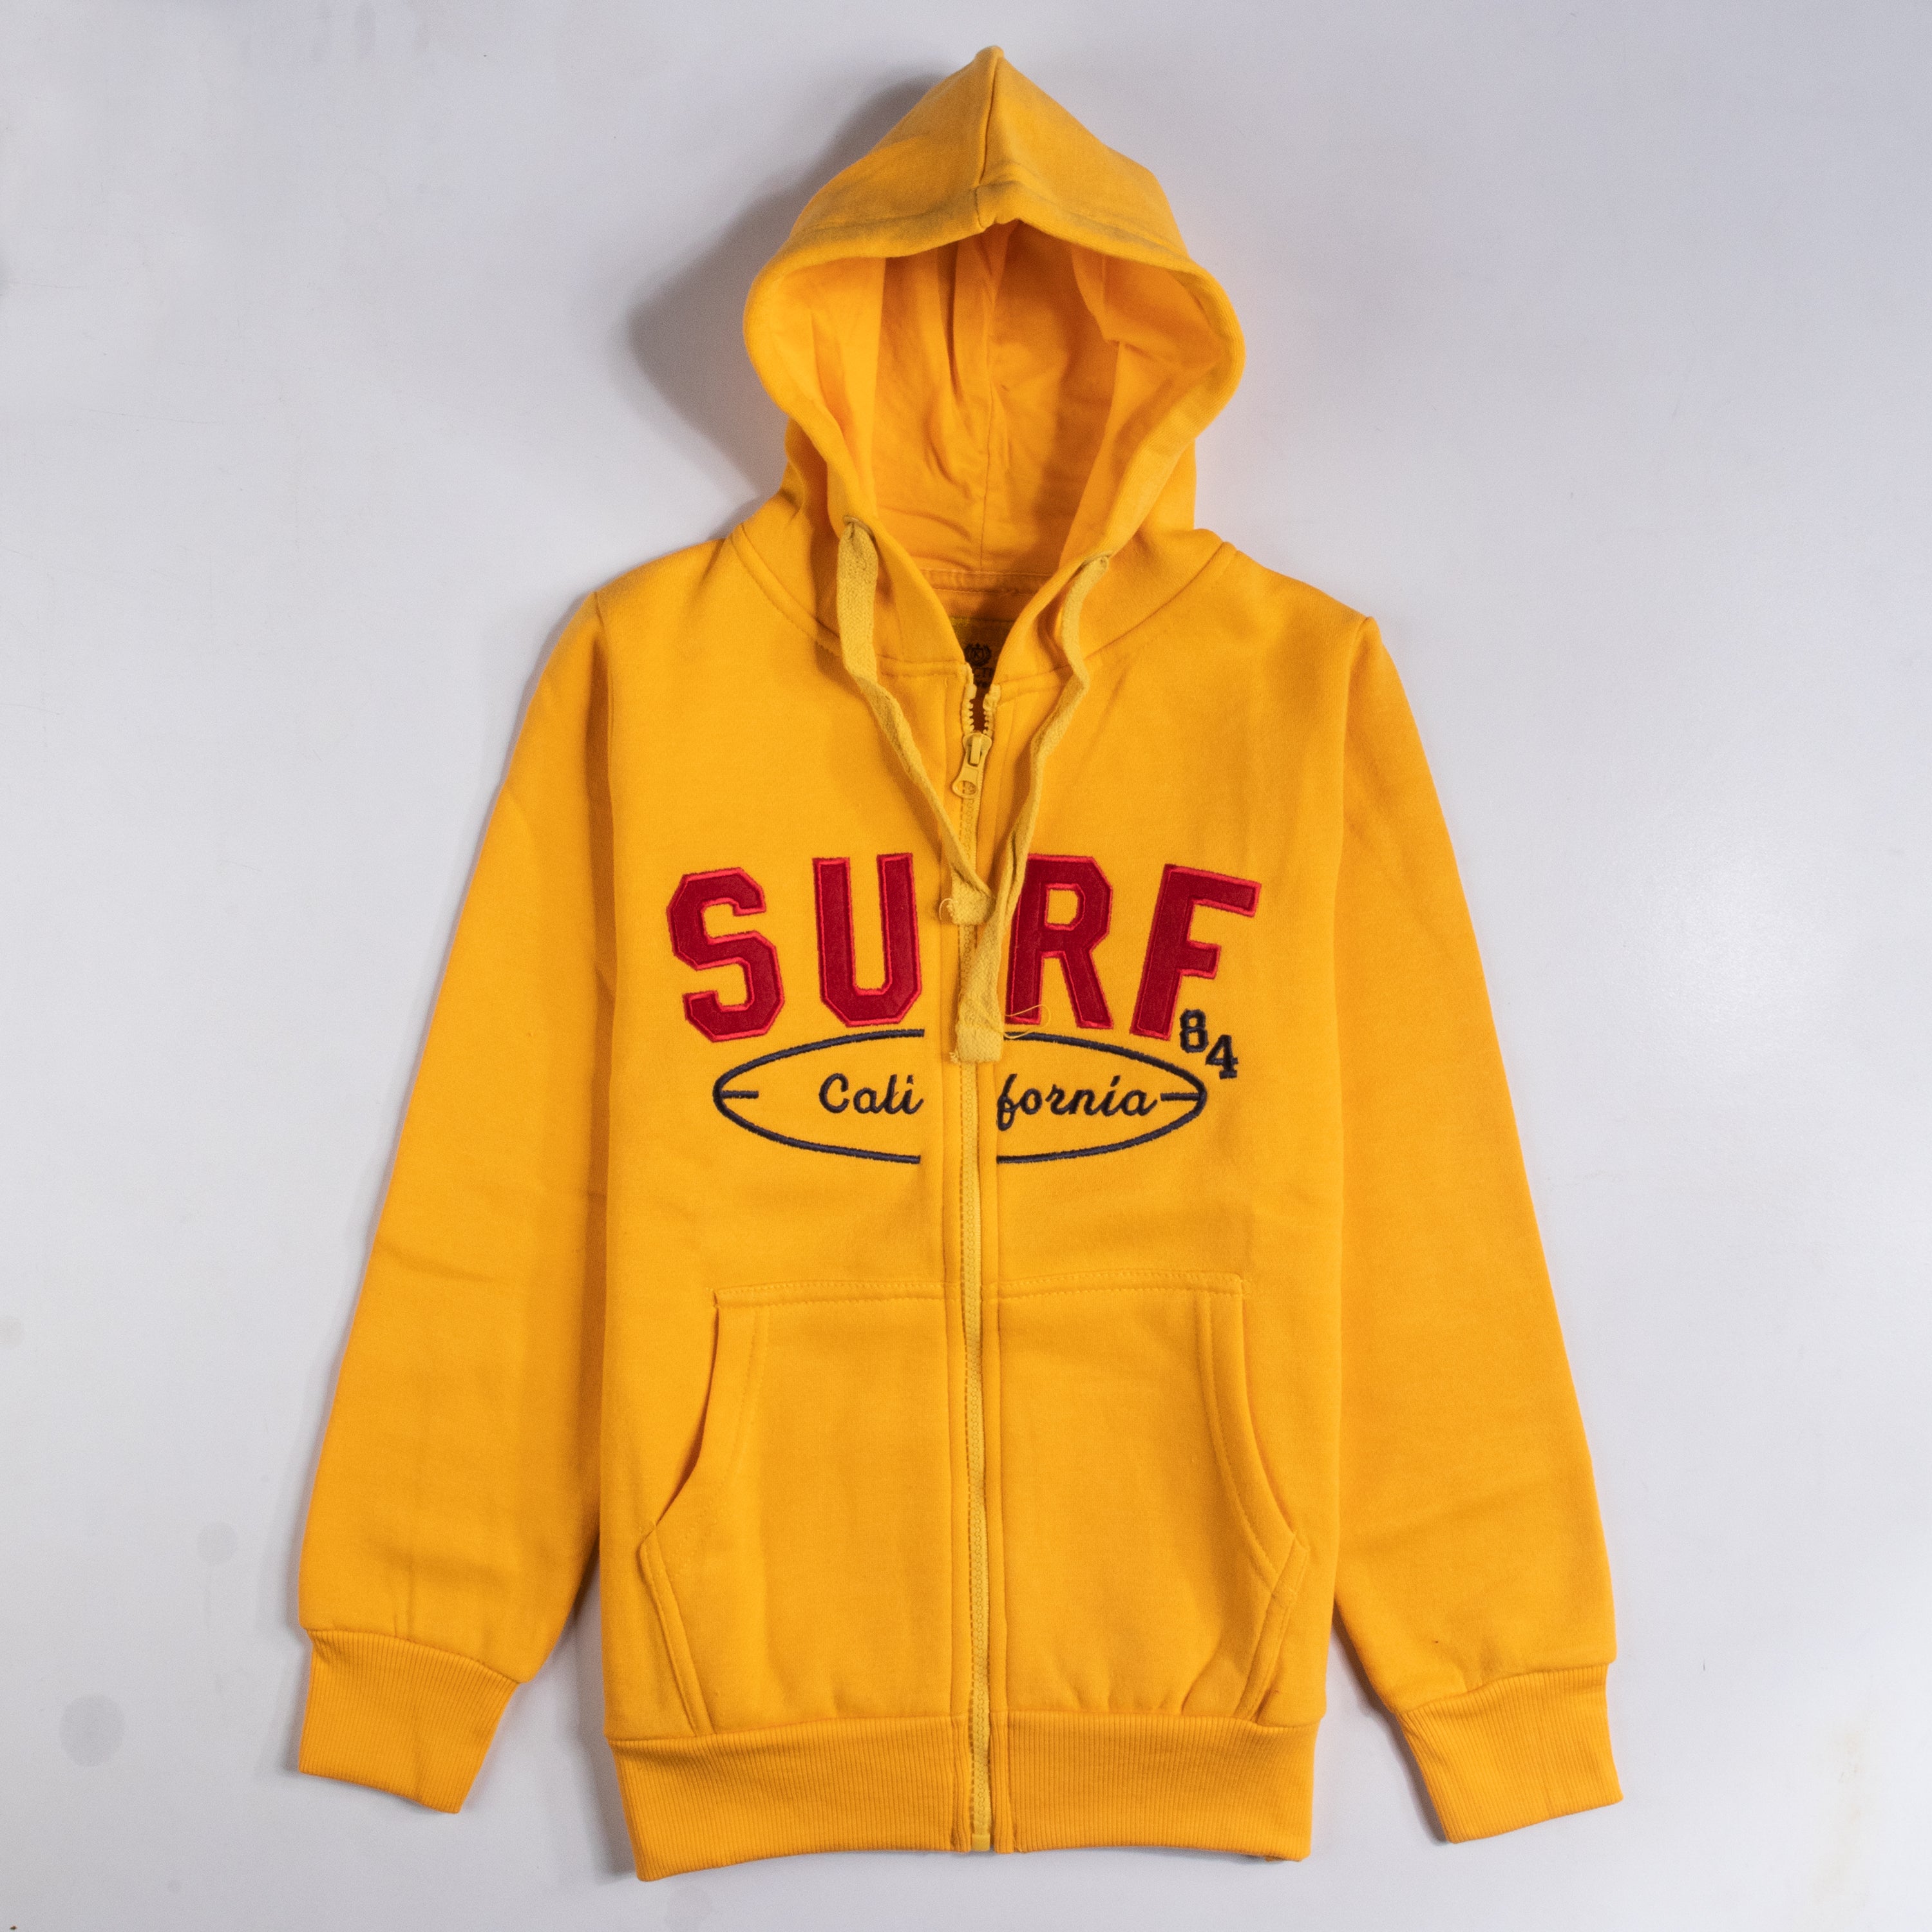 Kids Unisex Full Sleeve Hooded Color Yellow (SURF)